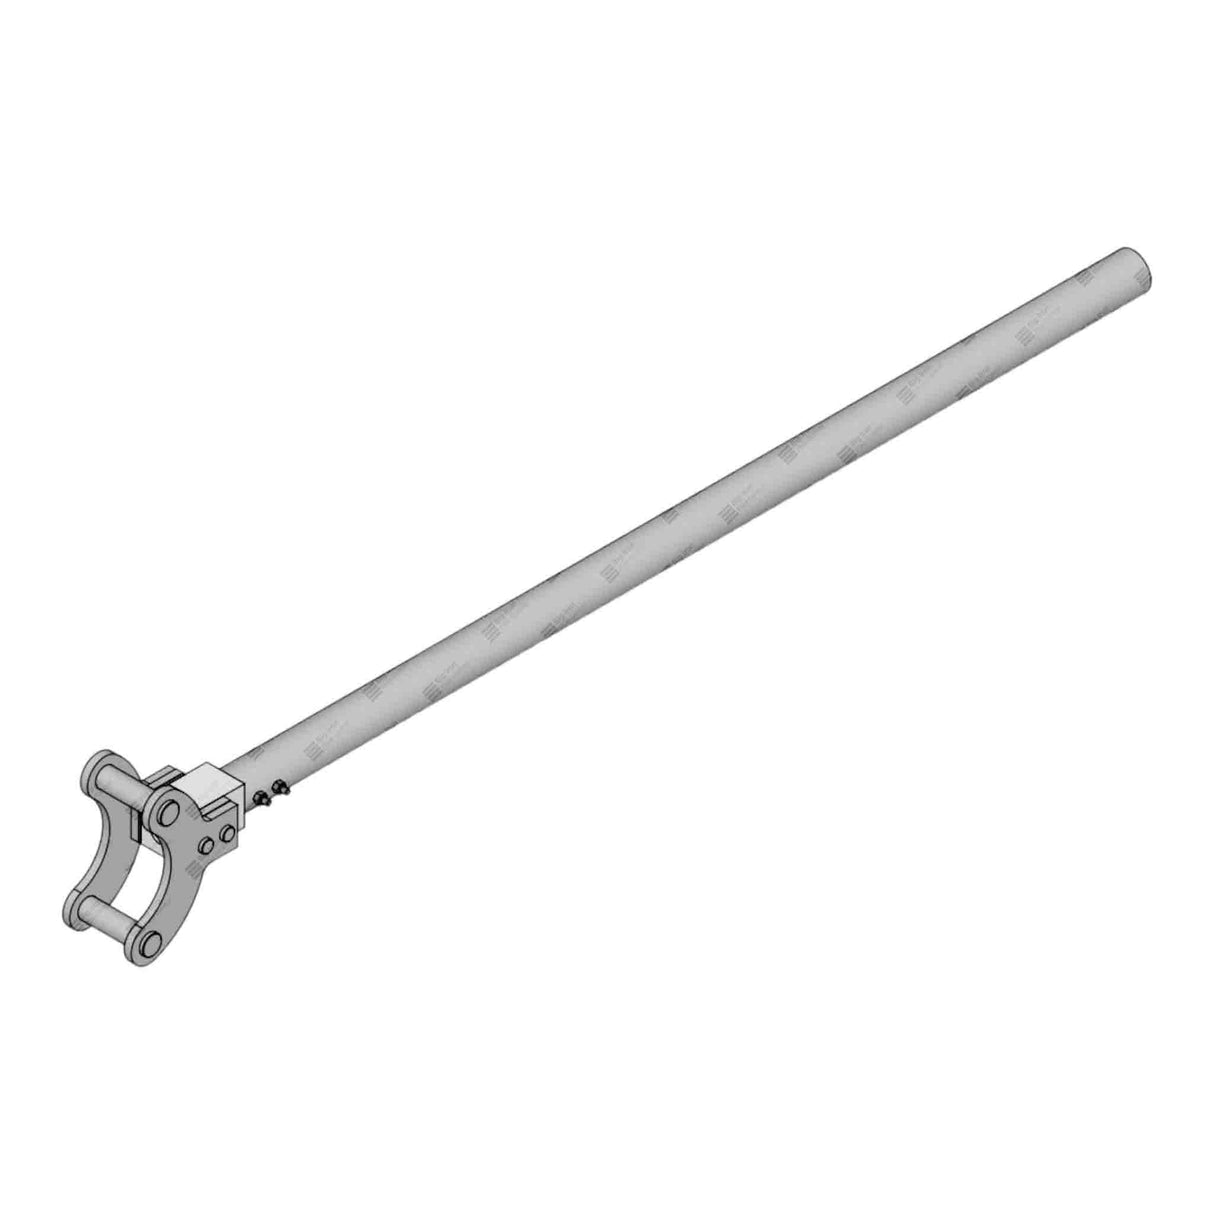 Wing Nut Wrench, 3" 1502, 4 FT